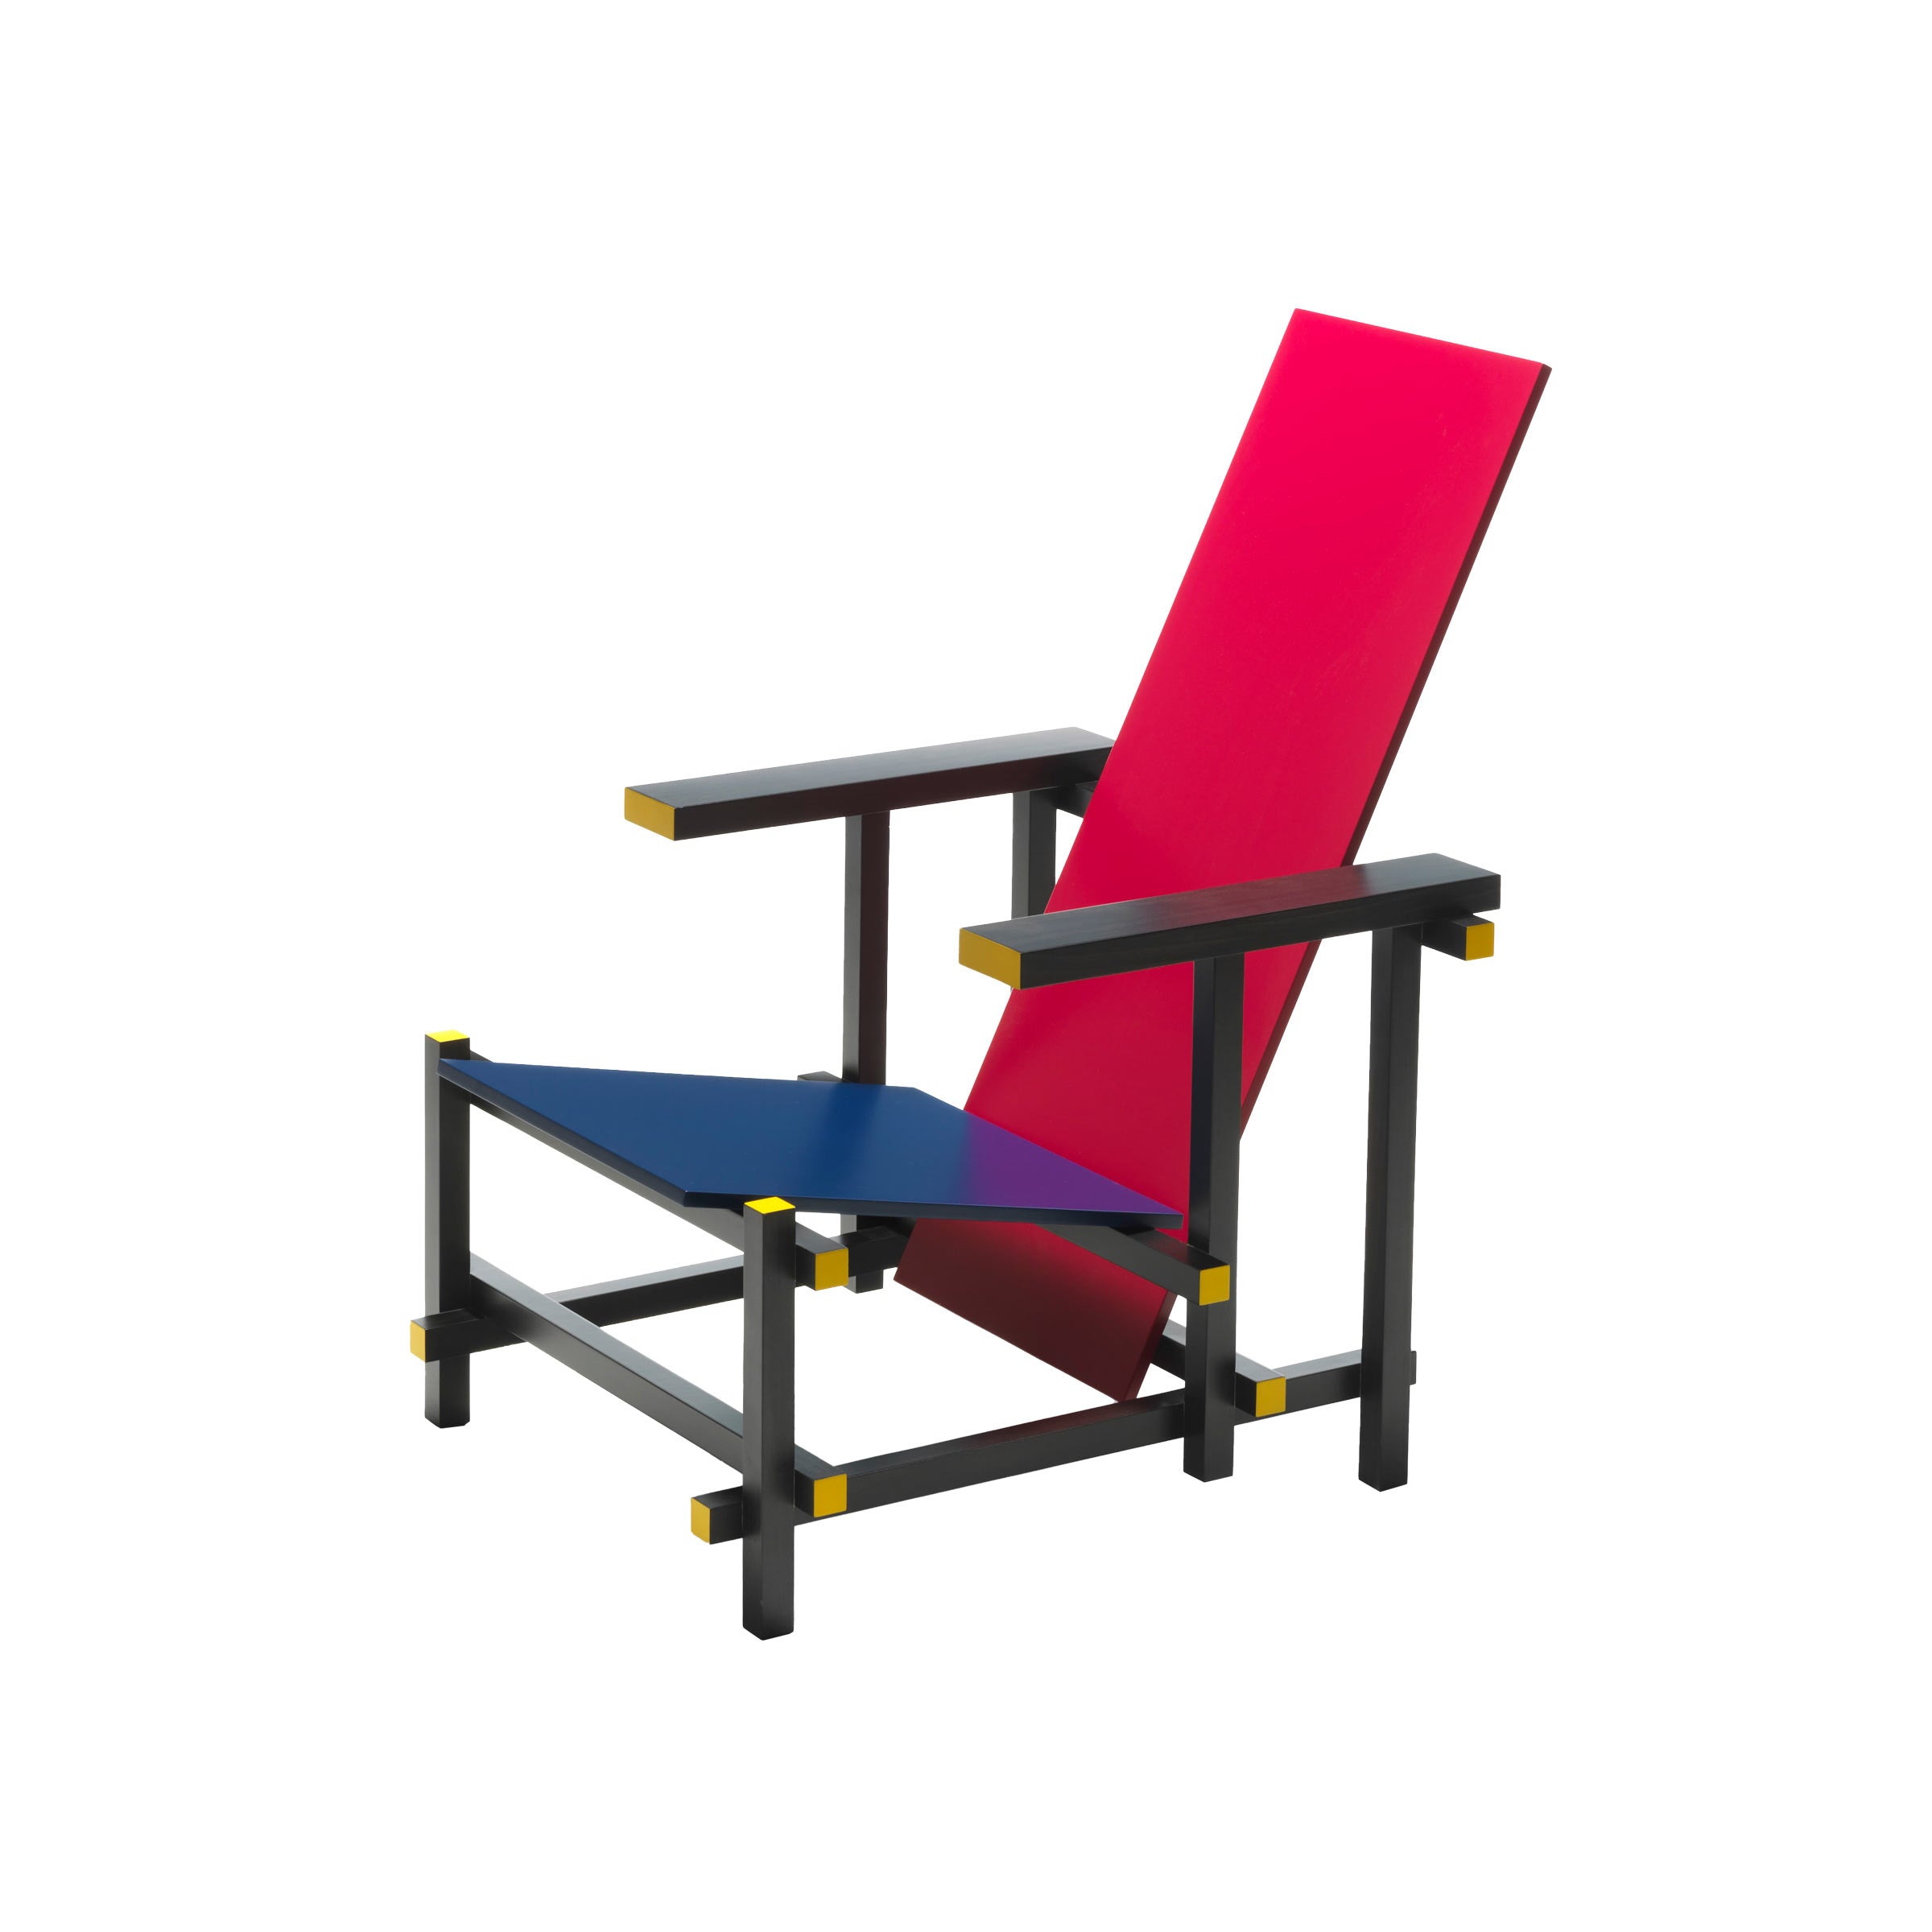 Armchair RED AND by T. Rietveld for Cassina – Design Italy